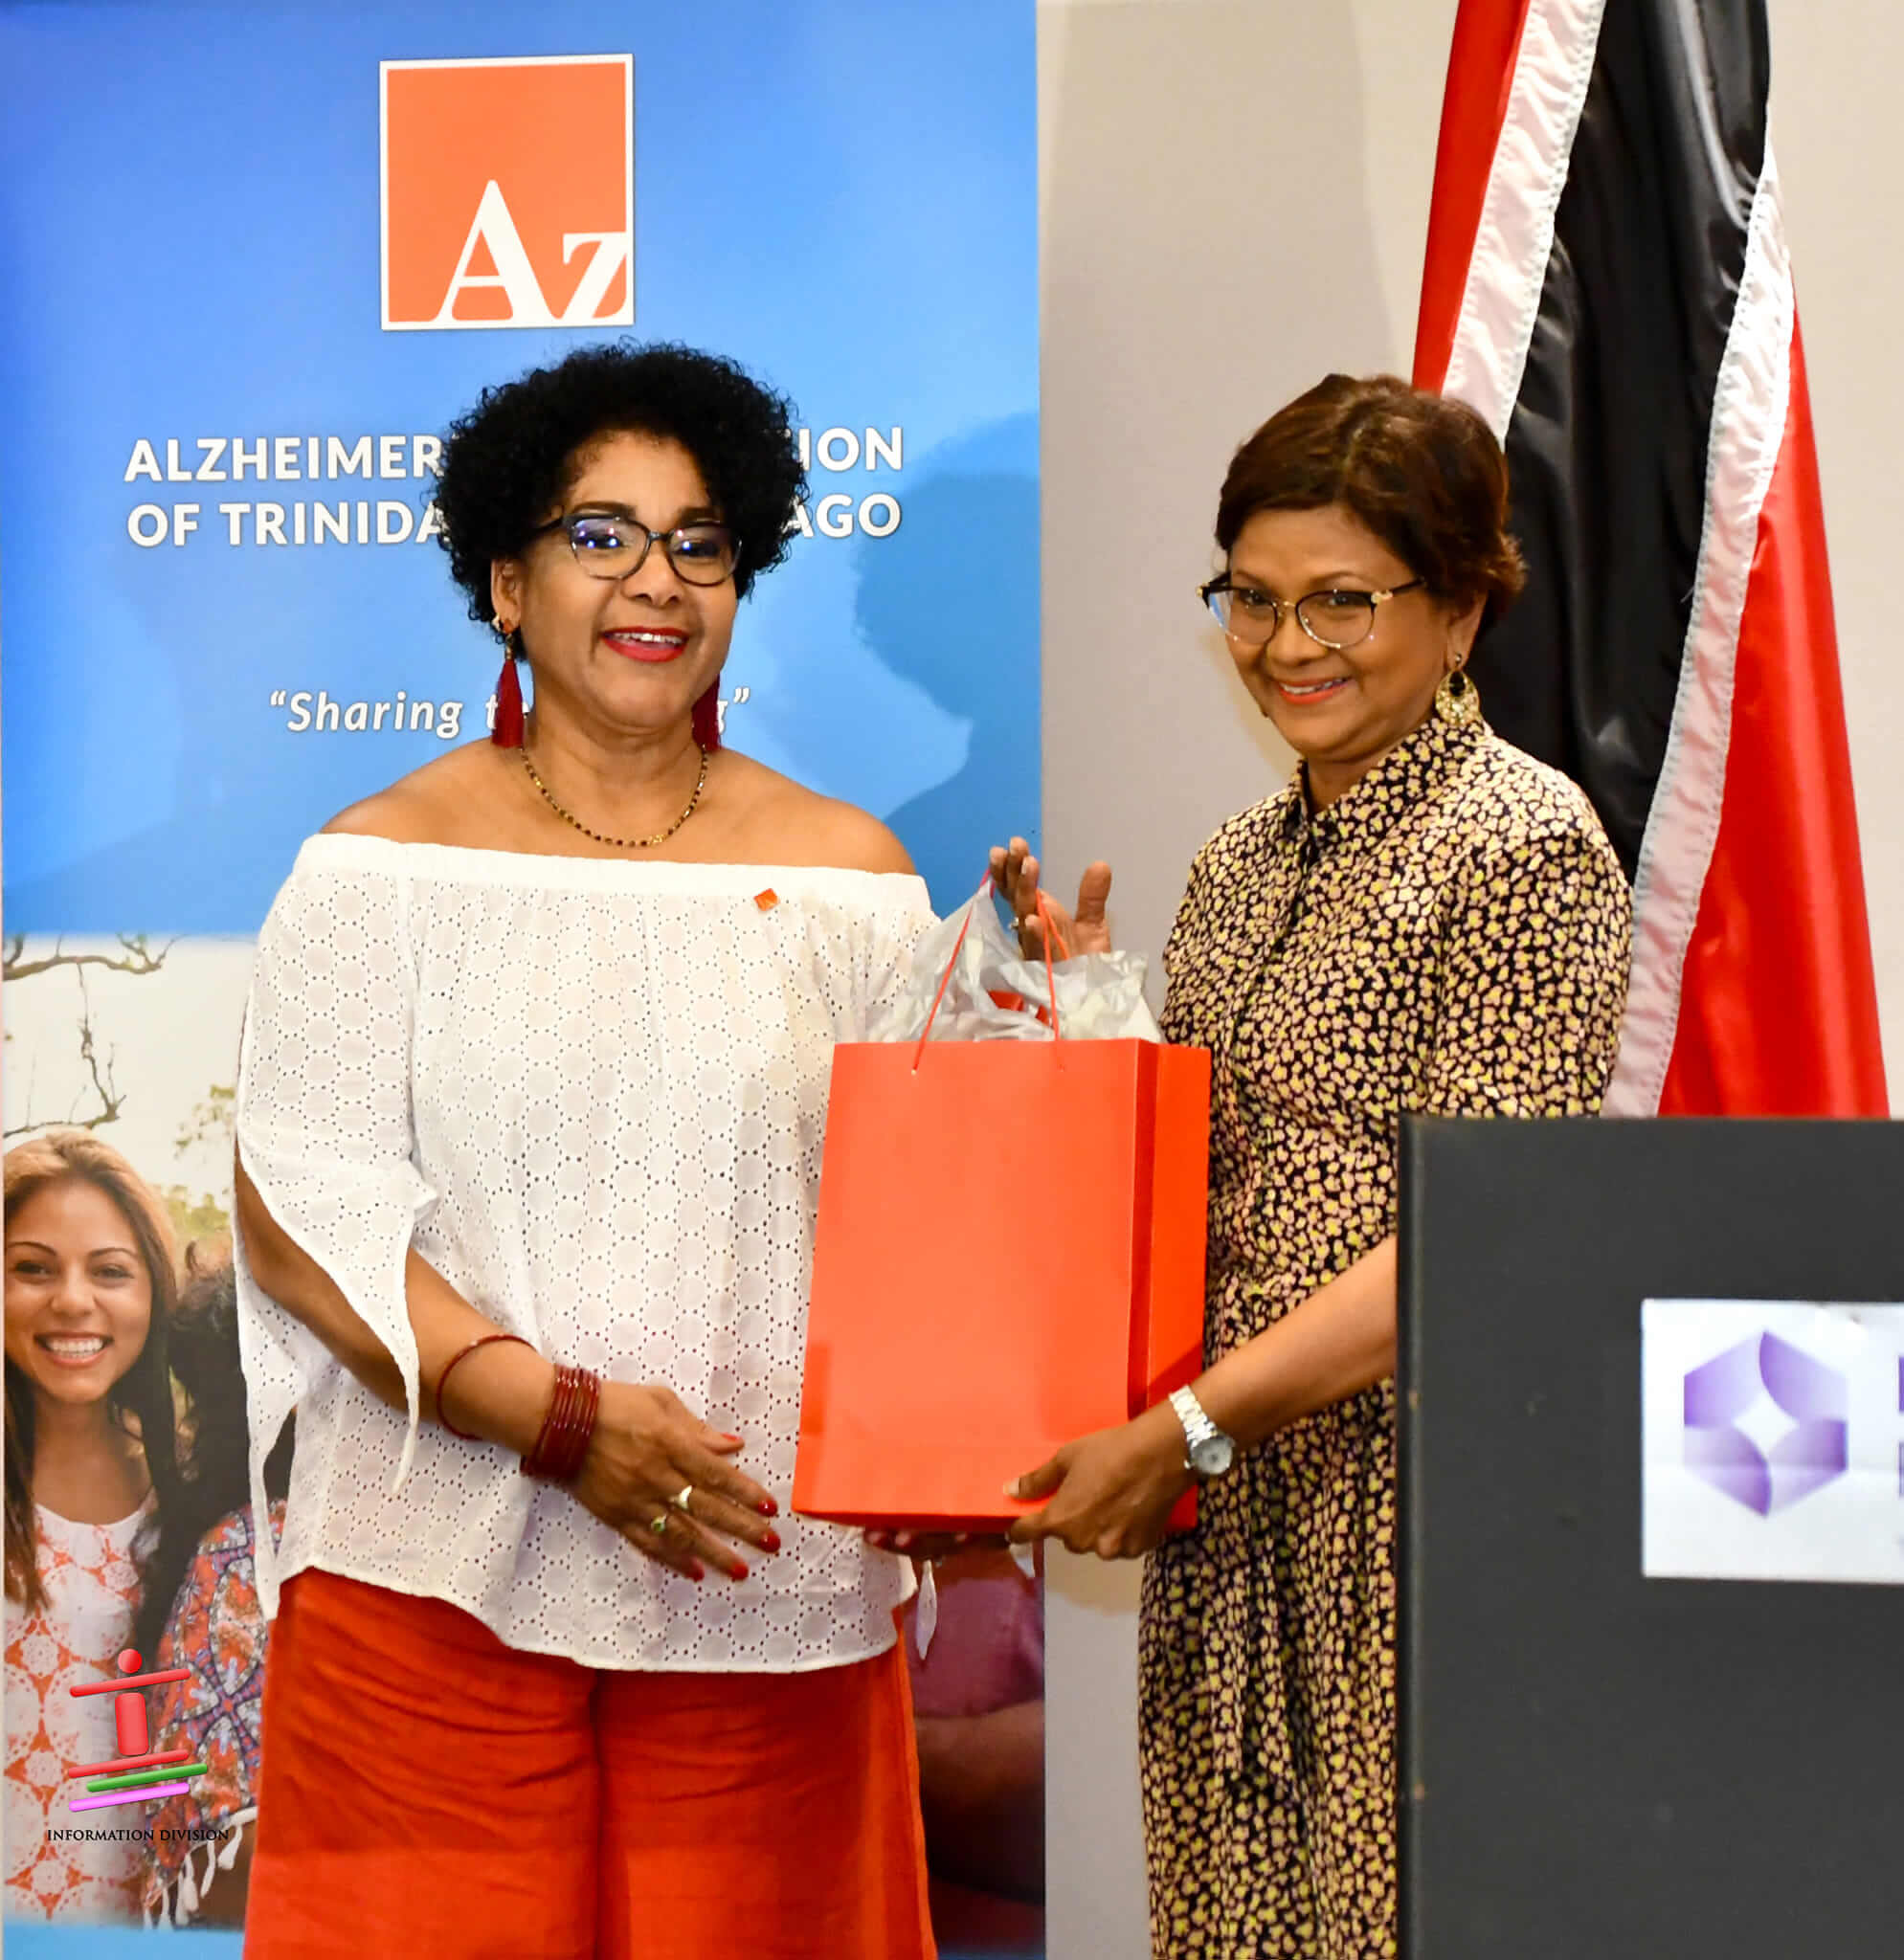 The Alzheimer’s Association of Trinidad and Tobago Launch & Lunch Fundraiser